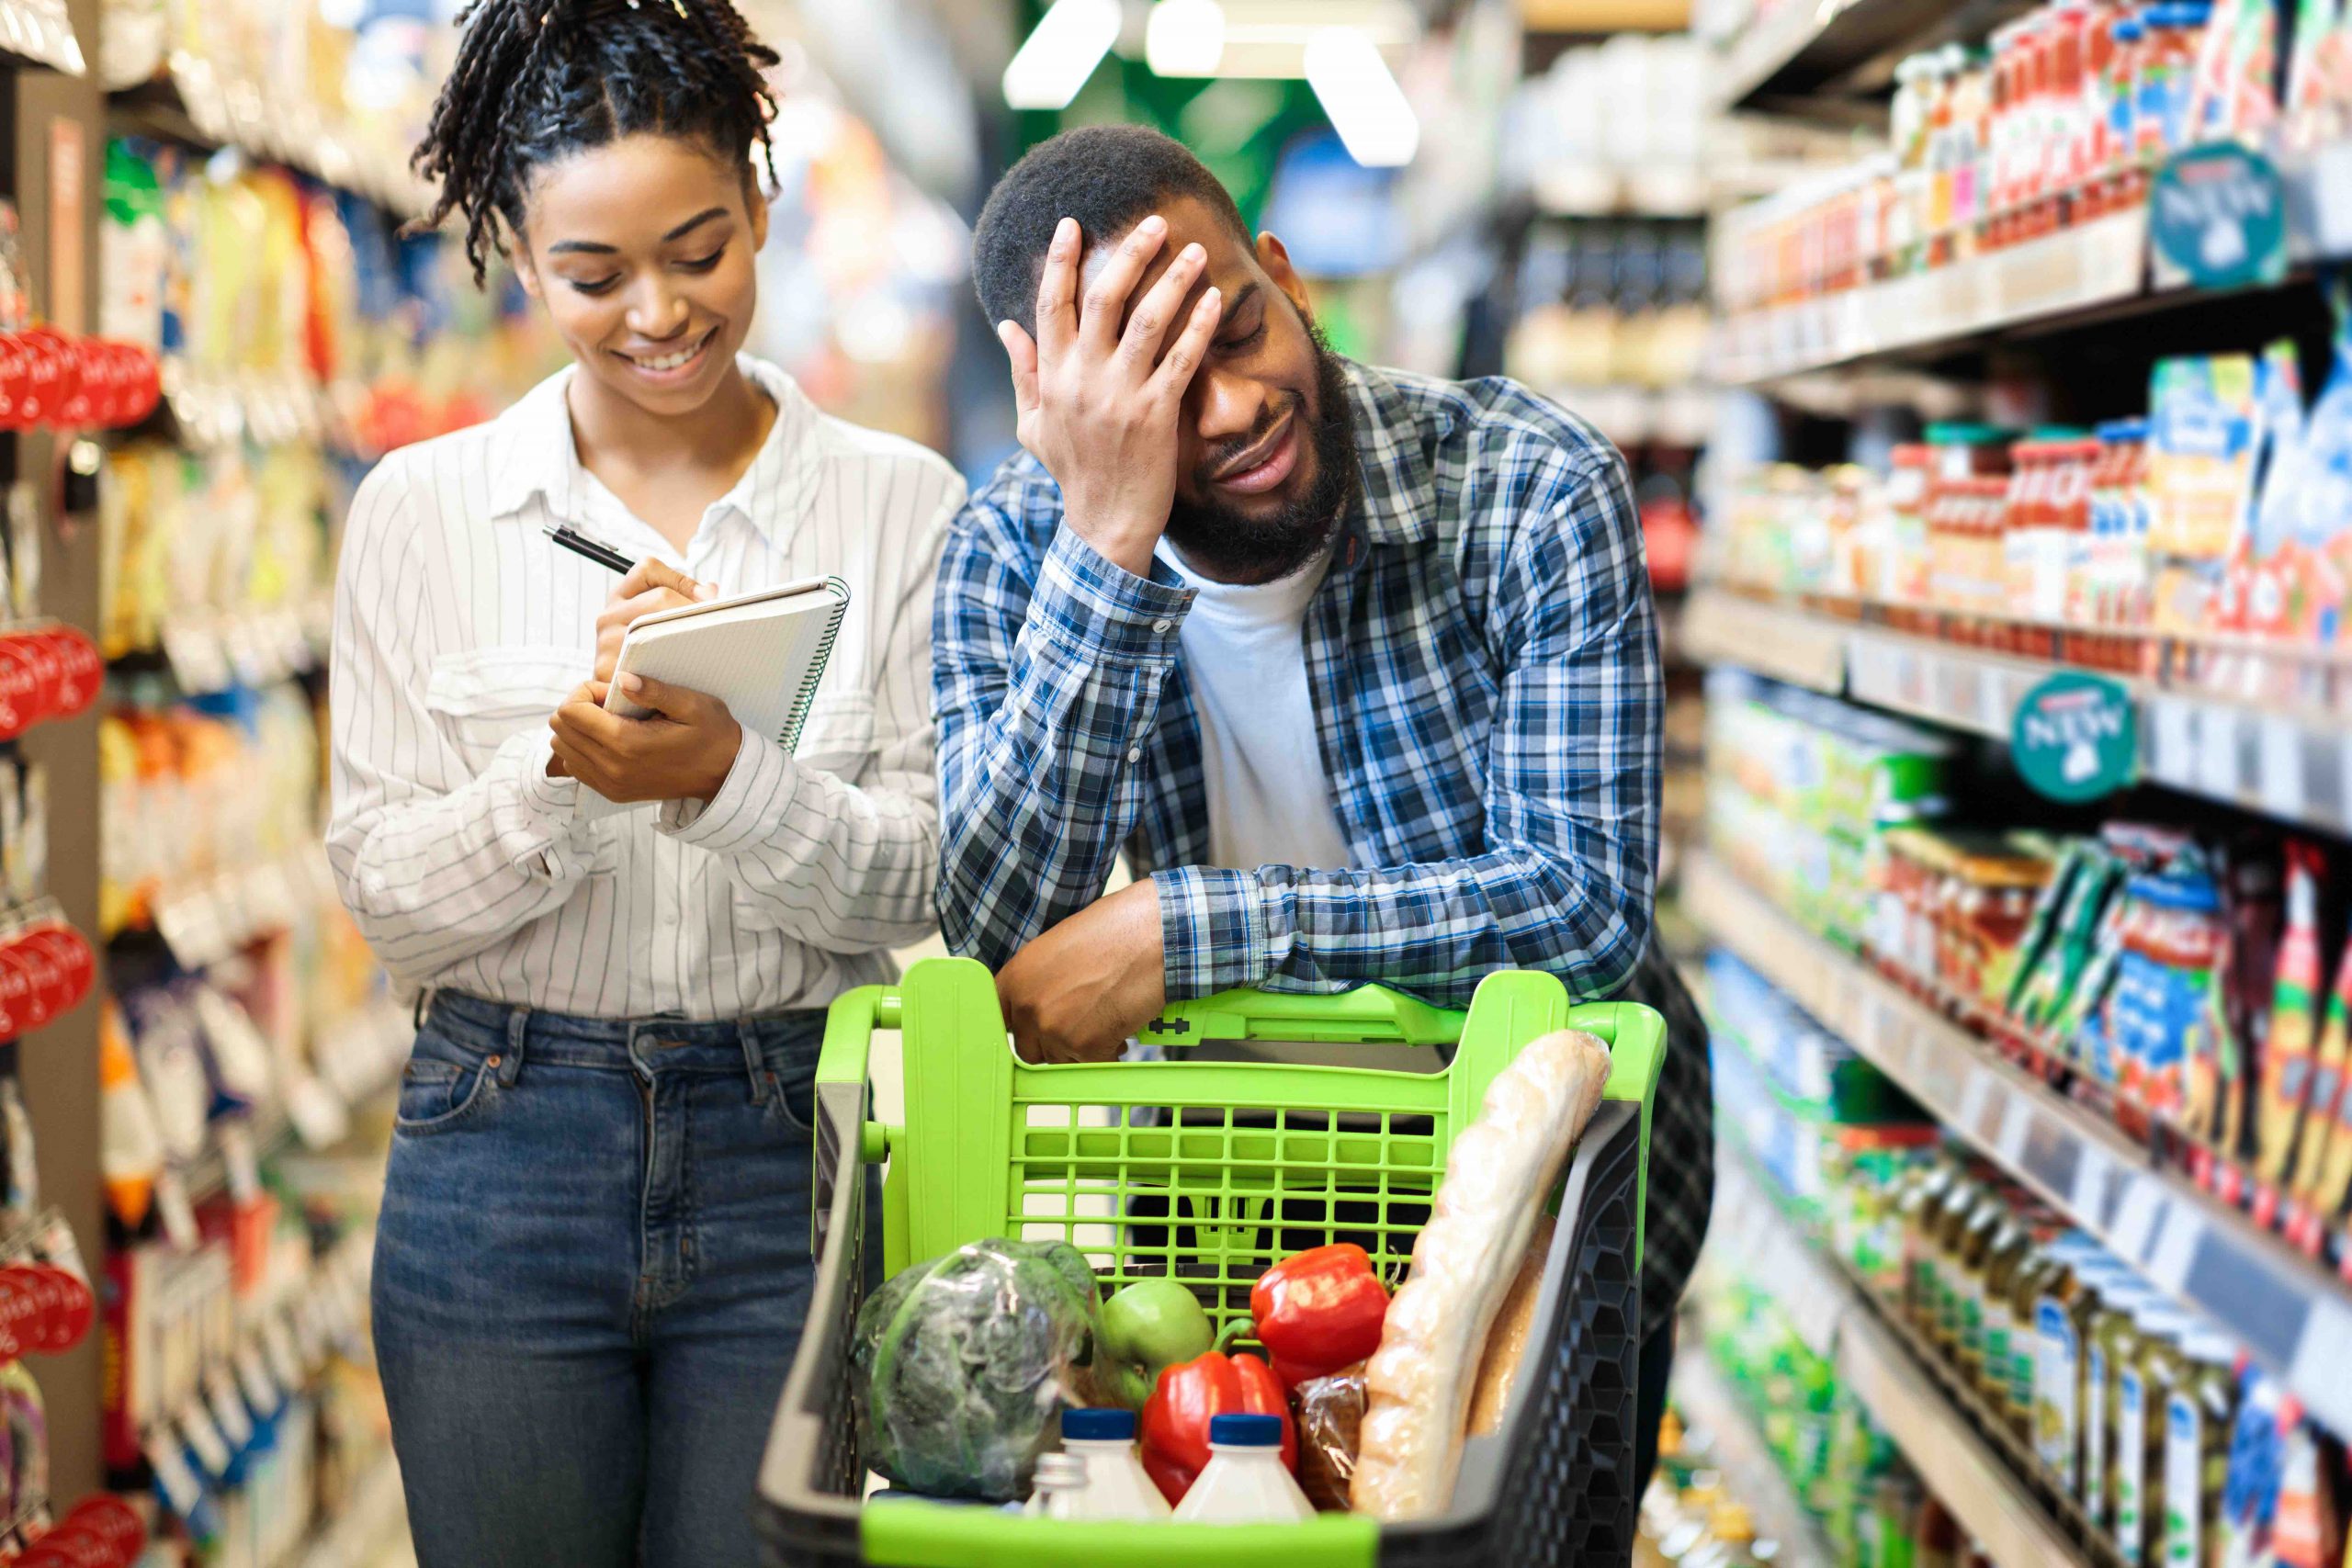 How rising grocery costs will impact future purchase behaviors.